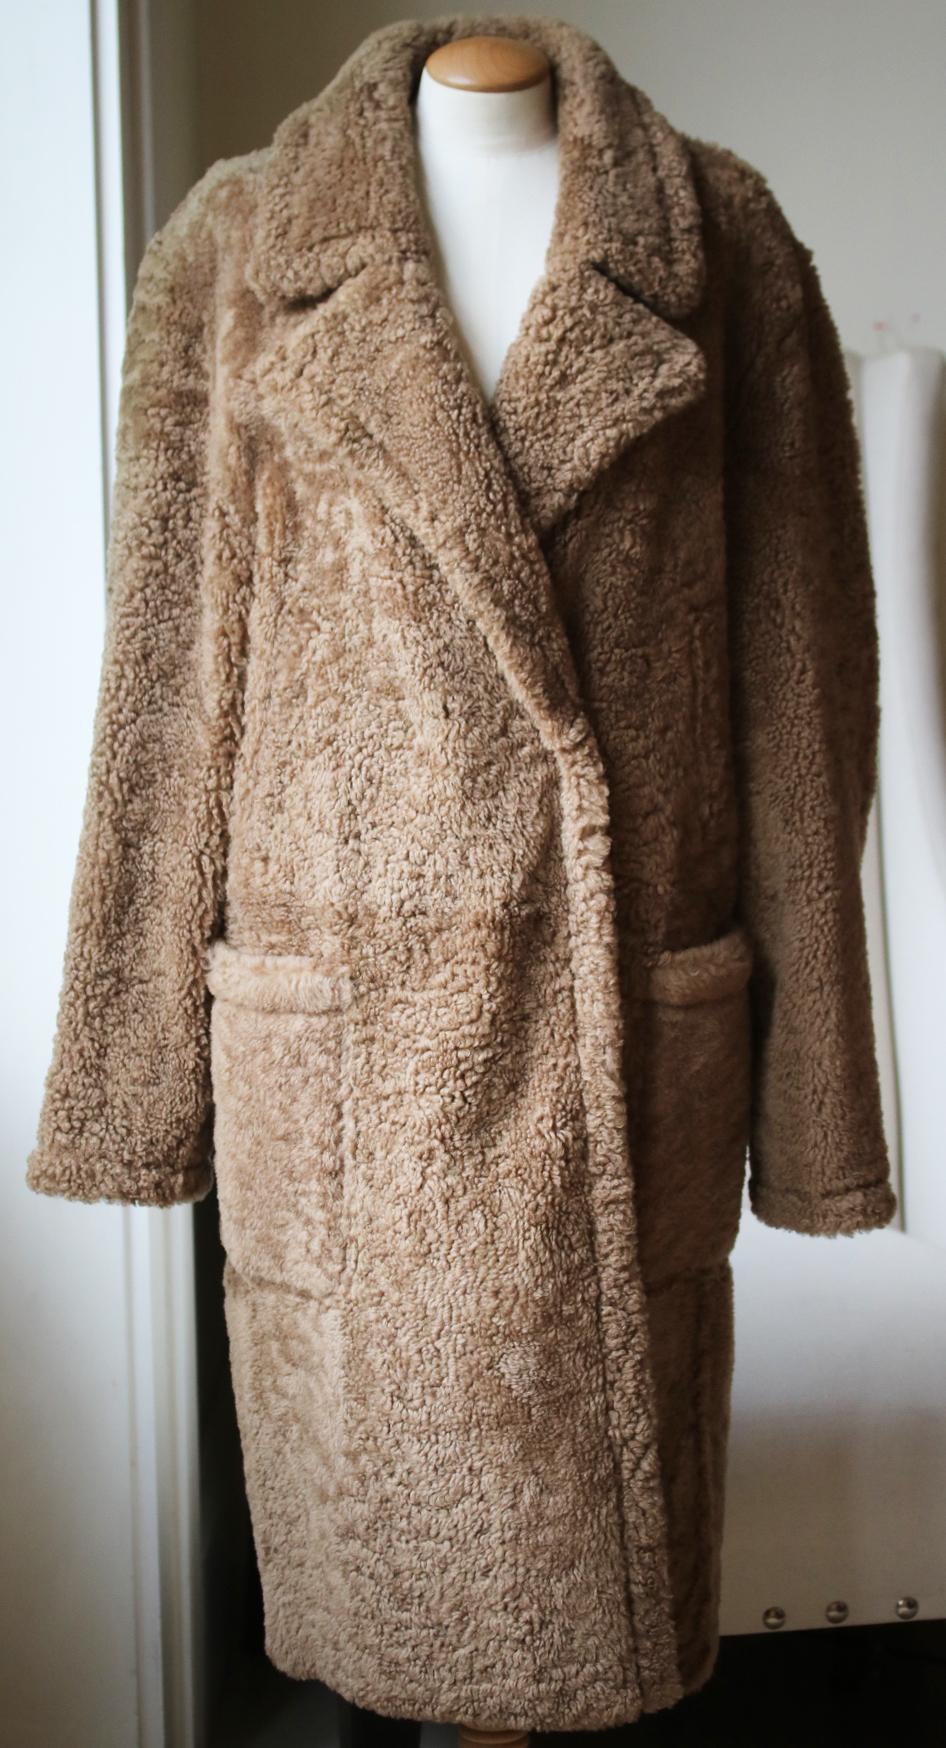 Yves Salomon's caramel-brown peak-lapel coat is crafted from a luxurious shearling to an oversize fit. Offering a stylish and contemporary shape that's secured in place with push-stud fastenings. Caramel-brown reverse-side shearling interior.